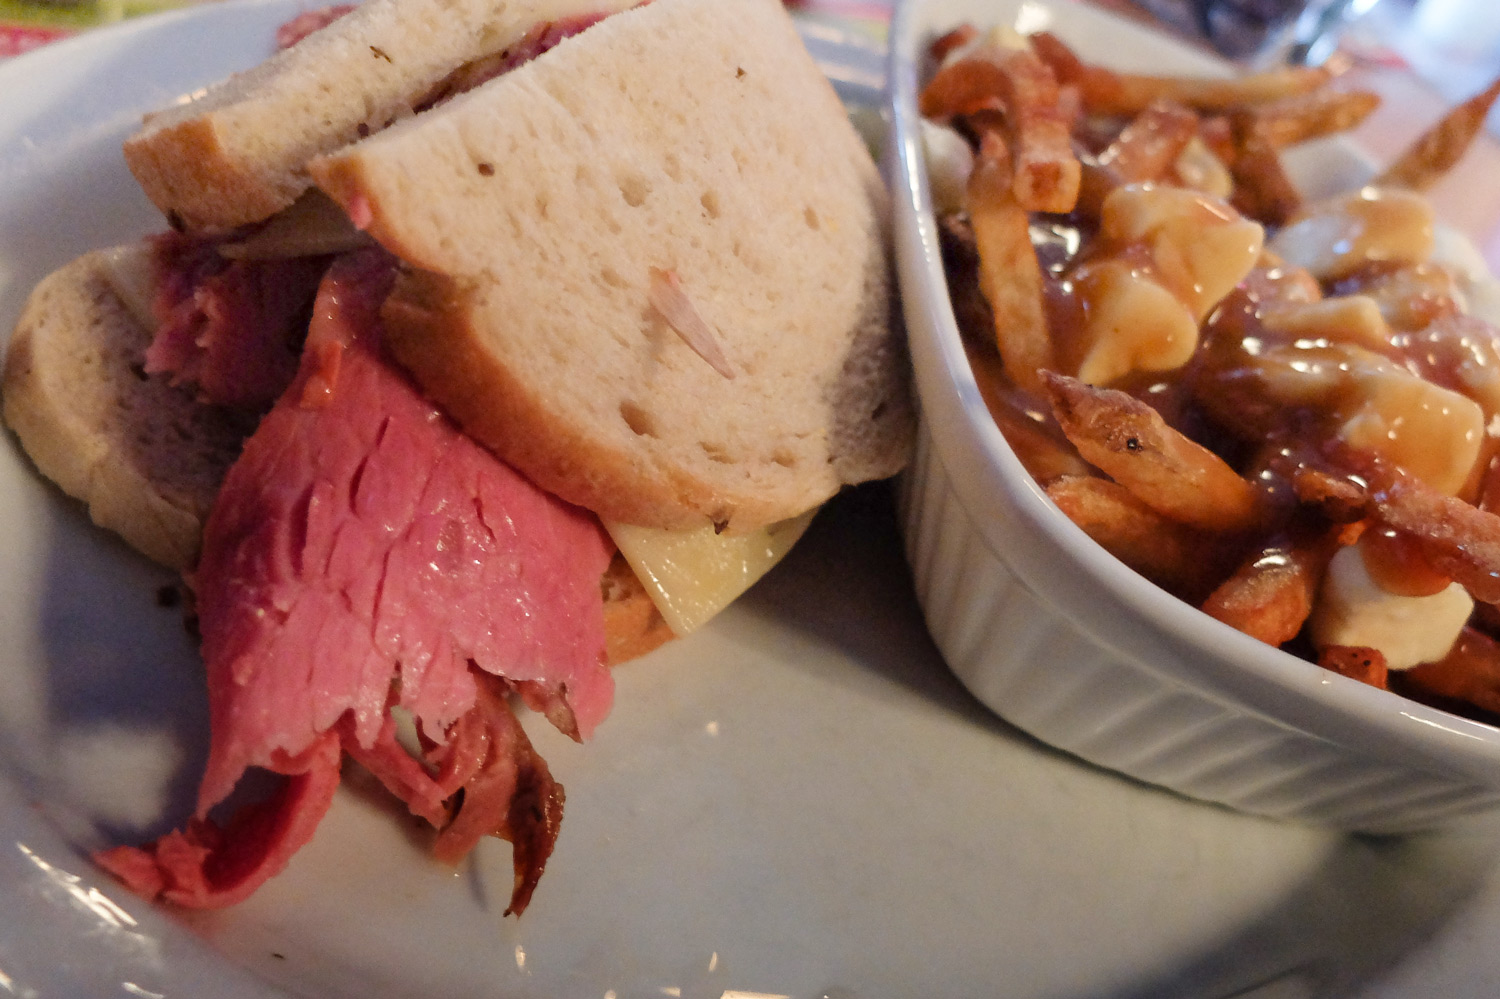 Smoked Meat Sandwich and Side of Poutine